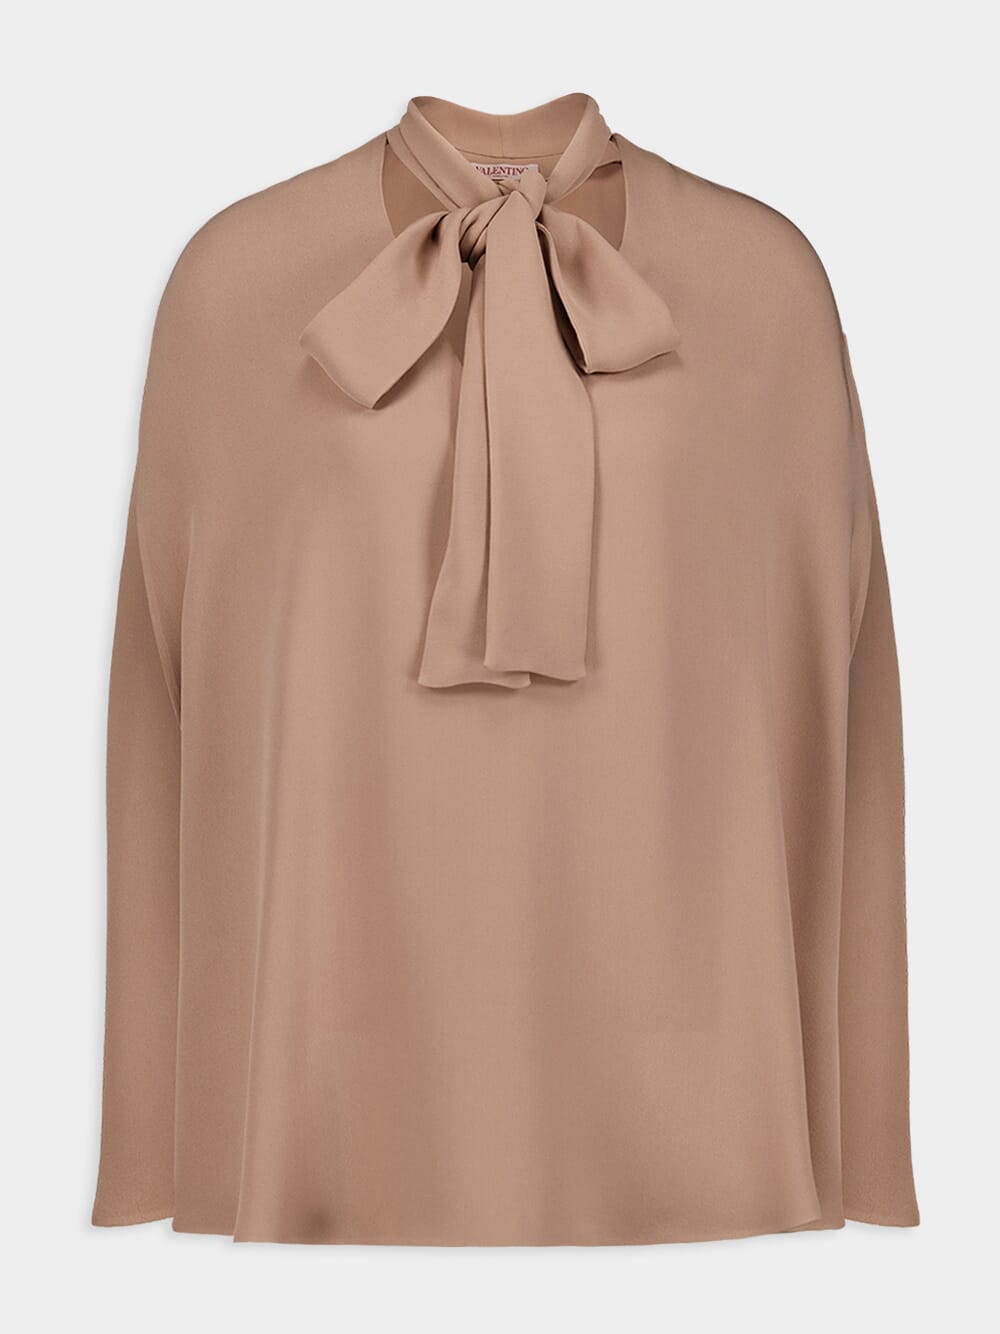 VGold caped tie-neck silk blouse